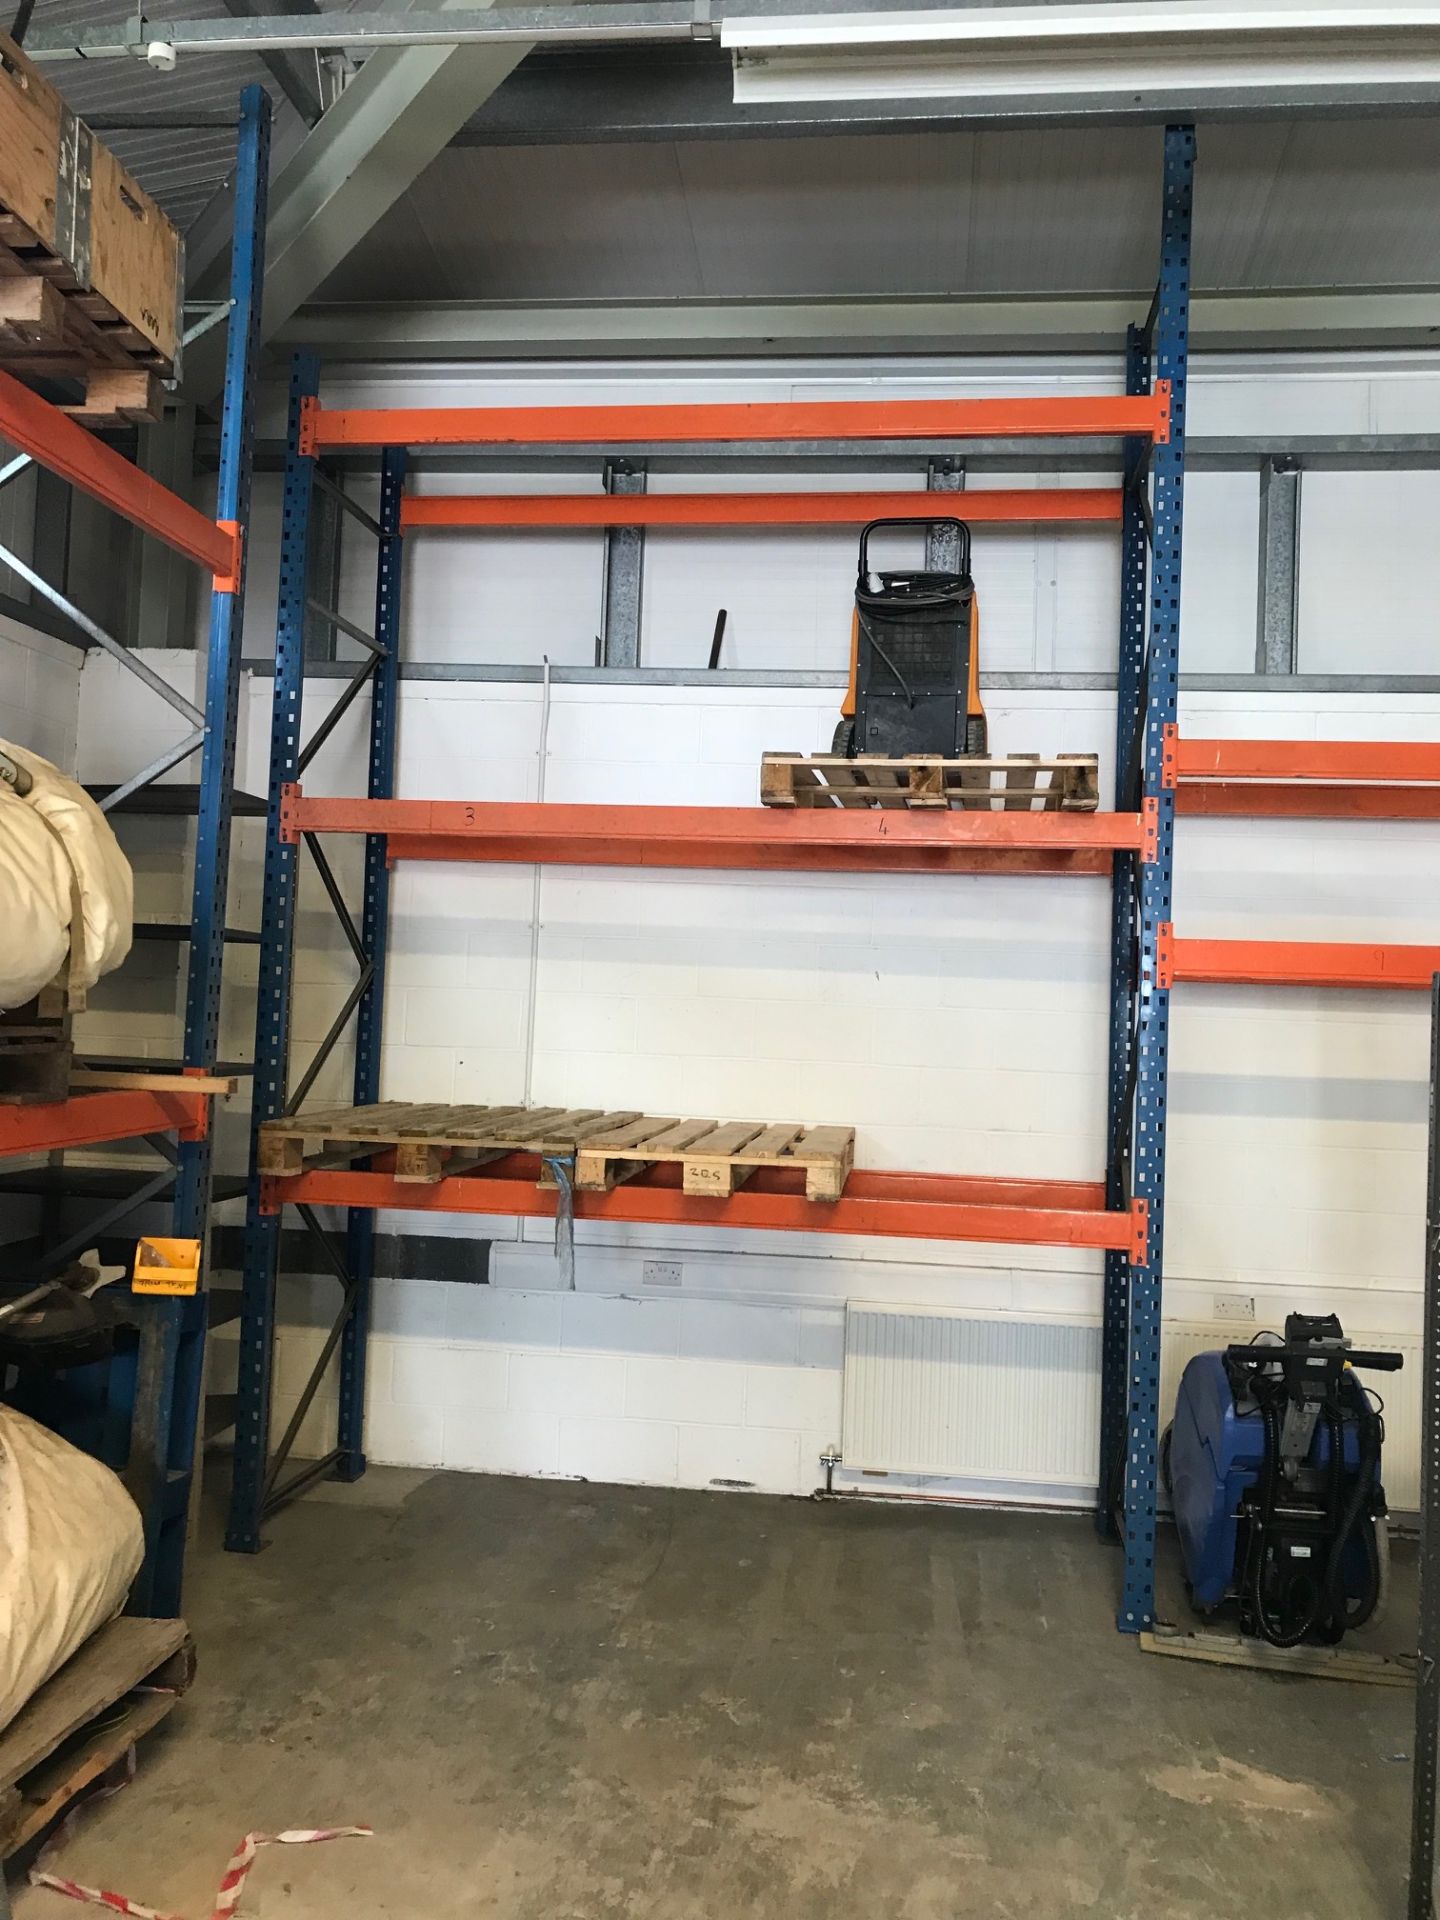 Qty of Pallet Racking